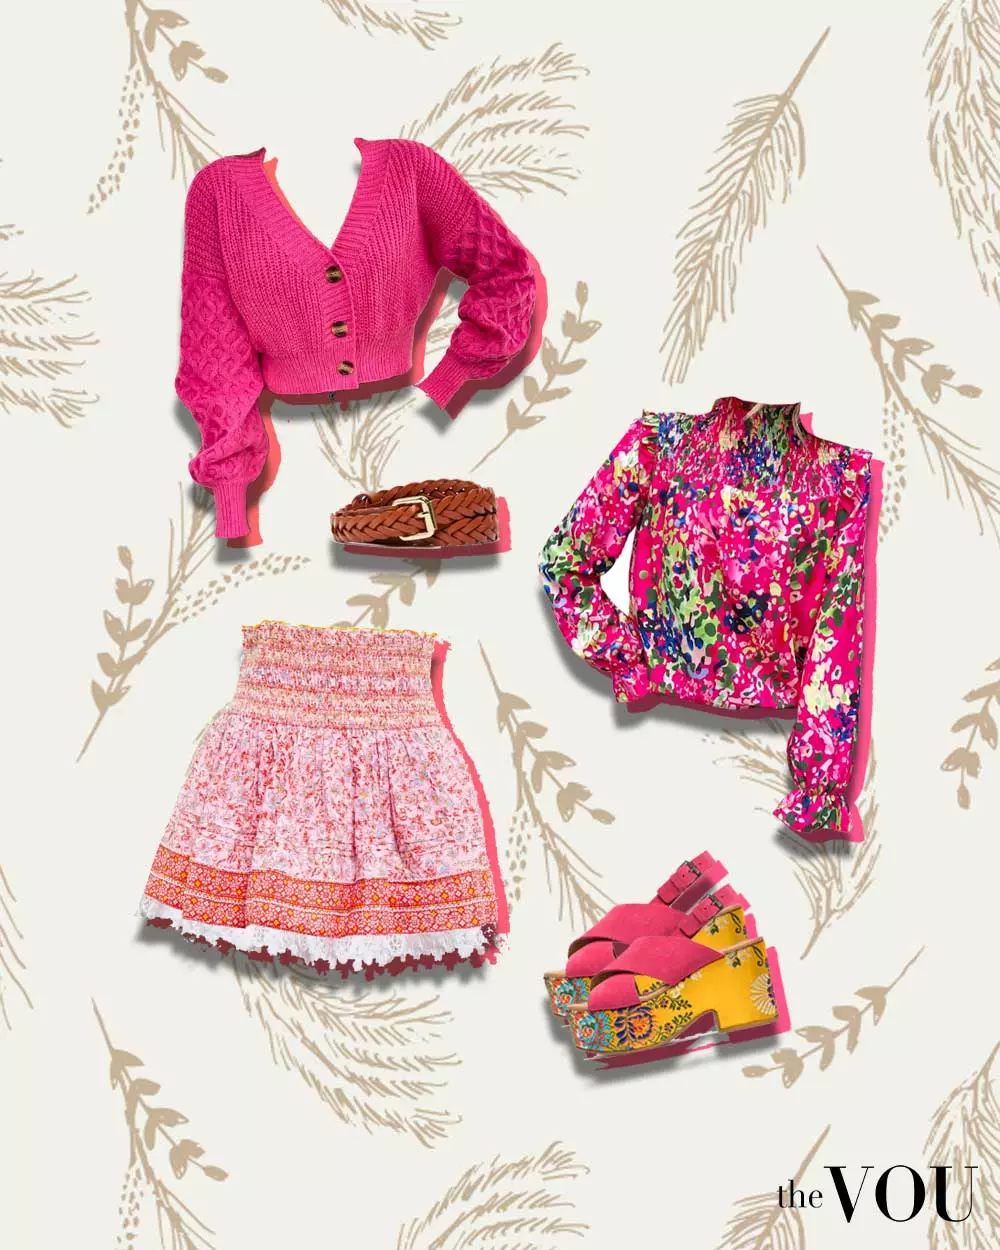 Boho Preppy outfit: Colorful knitted puff sleeve button-up cardigan, ruffle blouse, ruffle miniskirt, high-heel sandals, boho belt